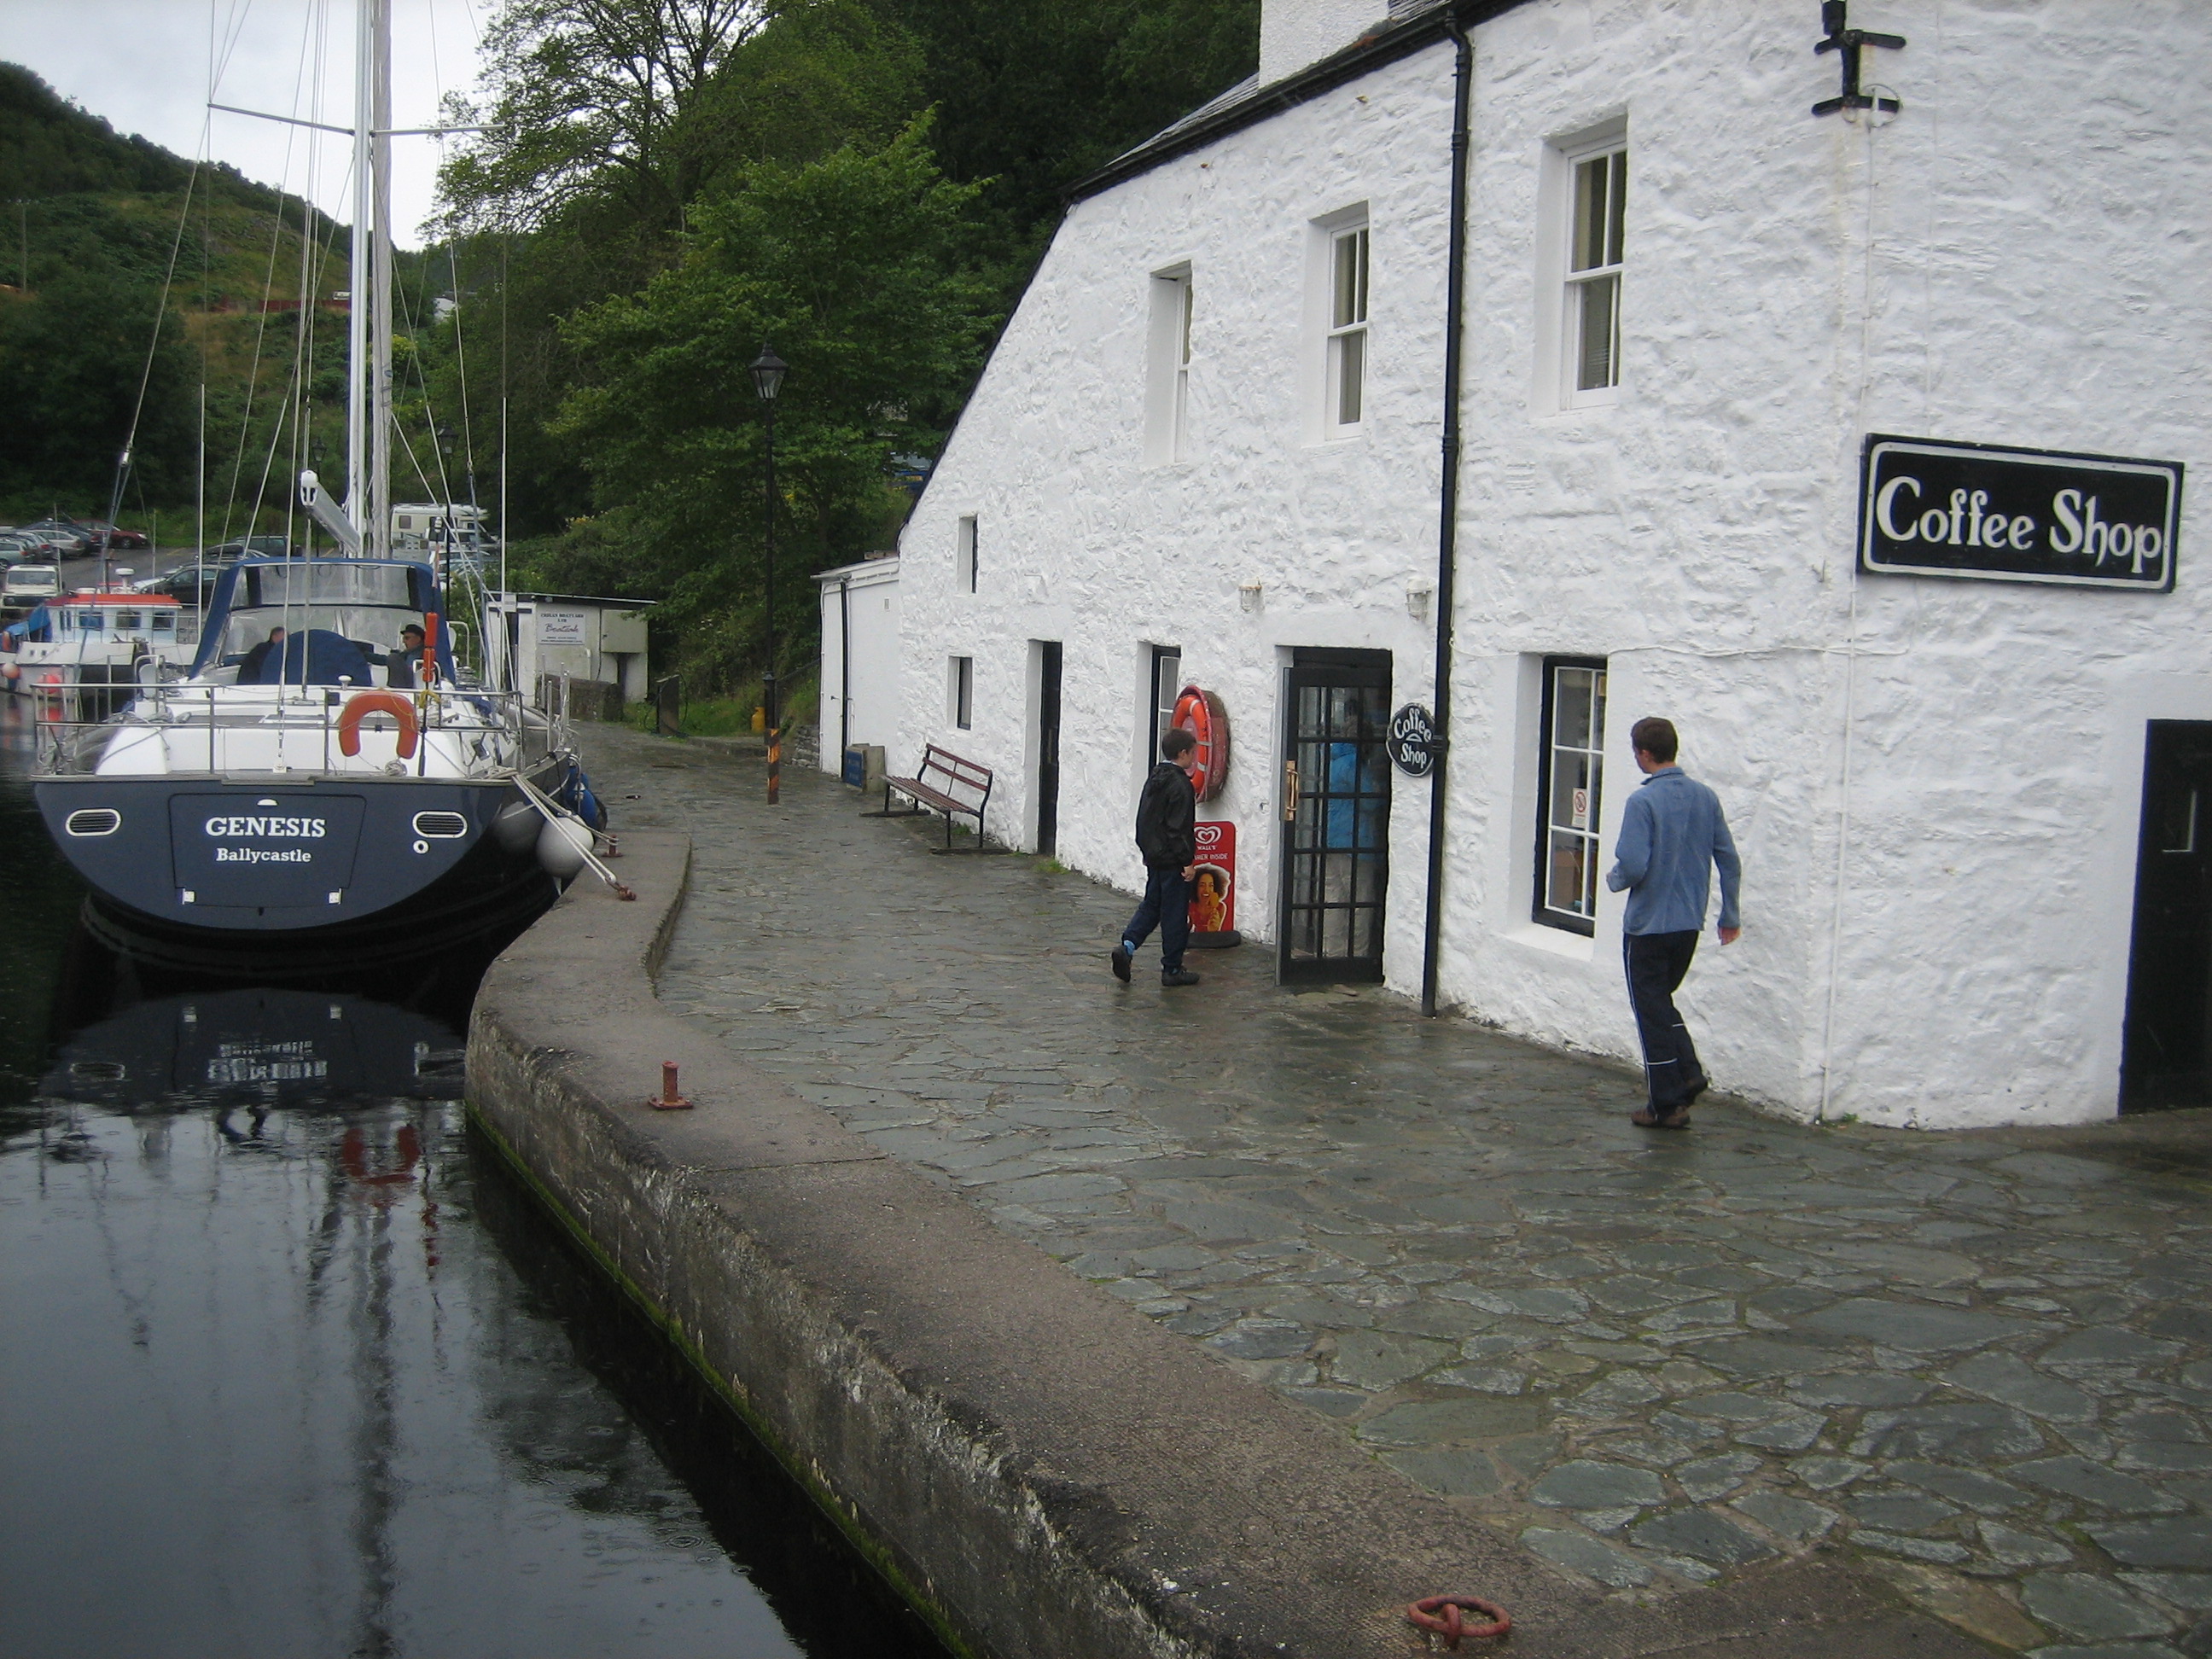 At Crinan, the west end of the canal